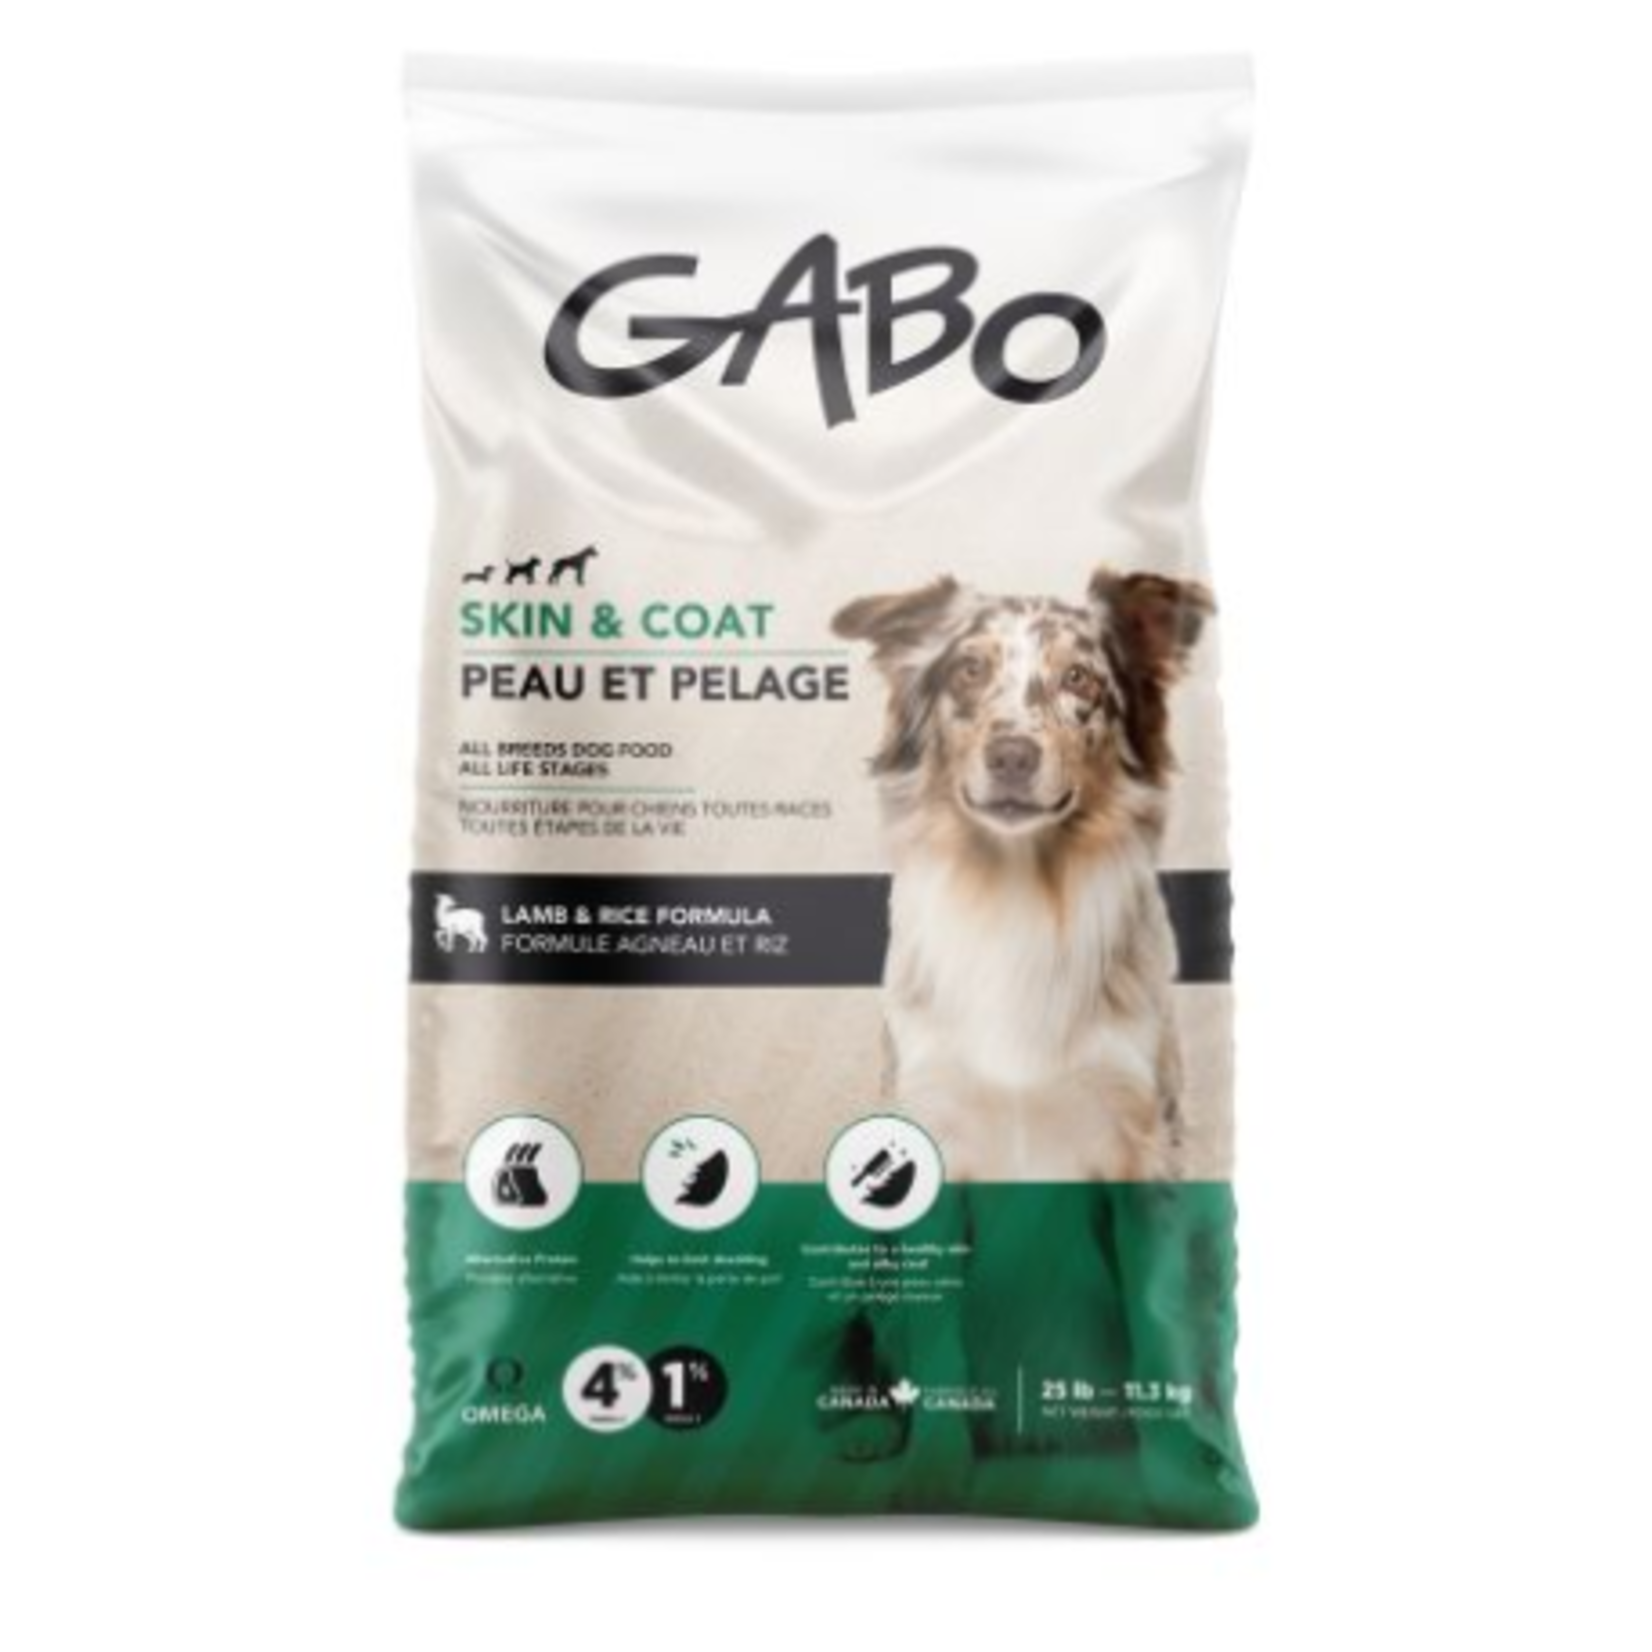 Gabo Skin & Coat - Lamb & Rice - All Life Stage - 25 lbs